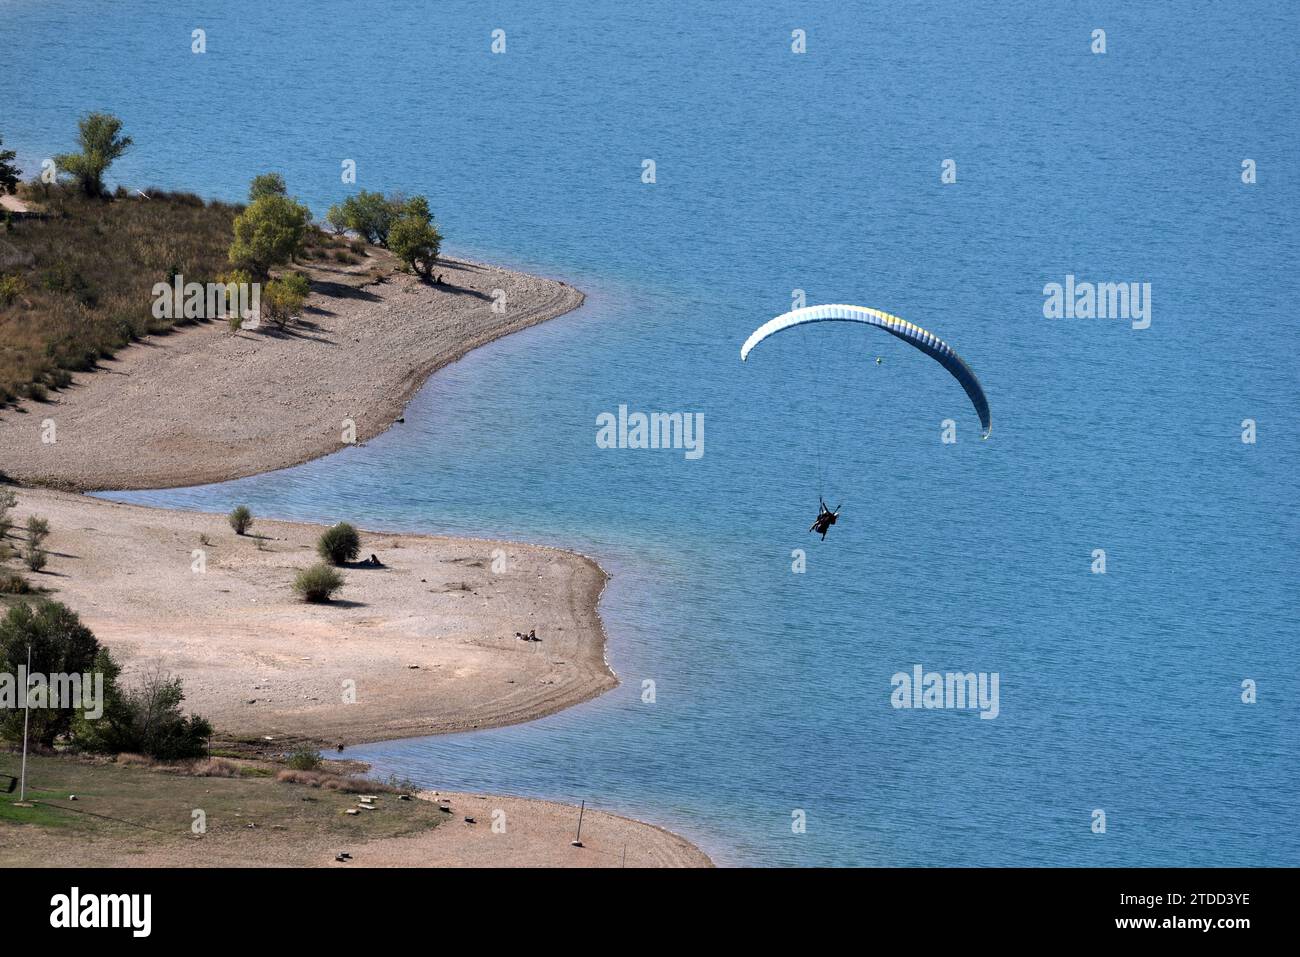 Hang Gliding or Hang Glider Flying over Sainte Croix Lake or Lake of Sainte-Croix Provence France Stock Photo